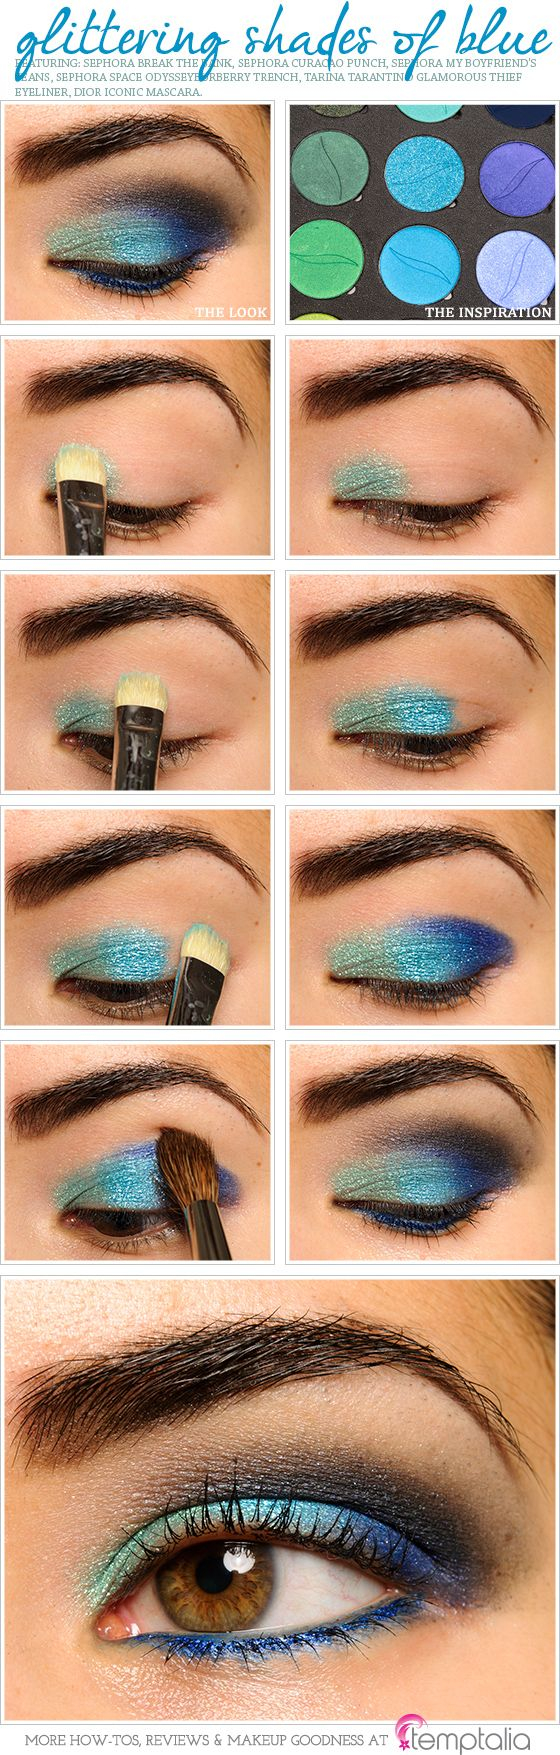 Eye Makeup Tips For Blue Eyes 27 Pretty Makeup Tutorials For Brown Eyes Styles Weekly